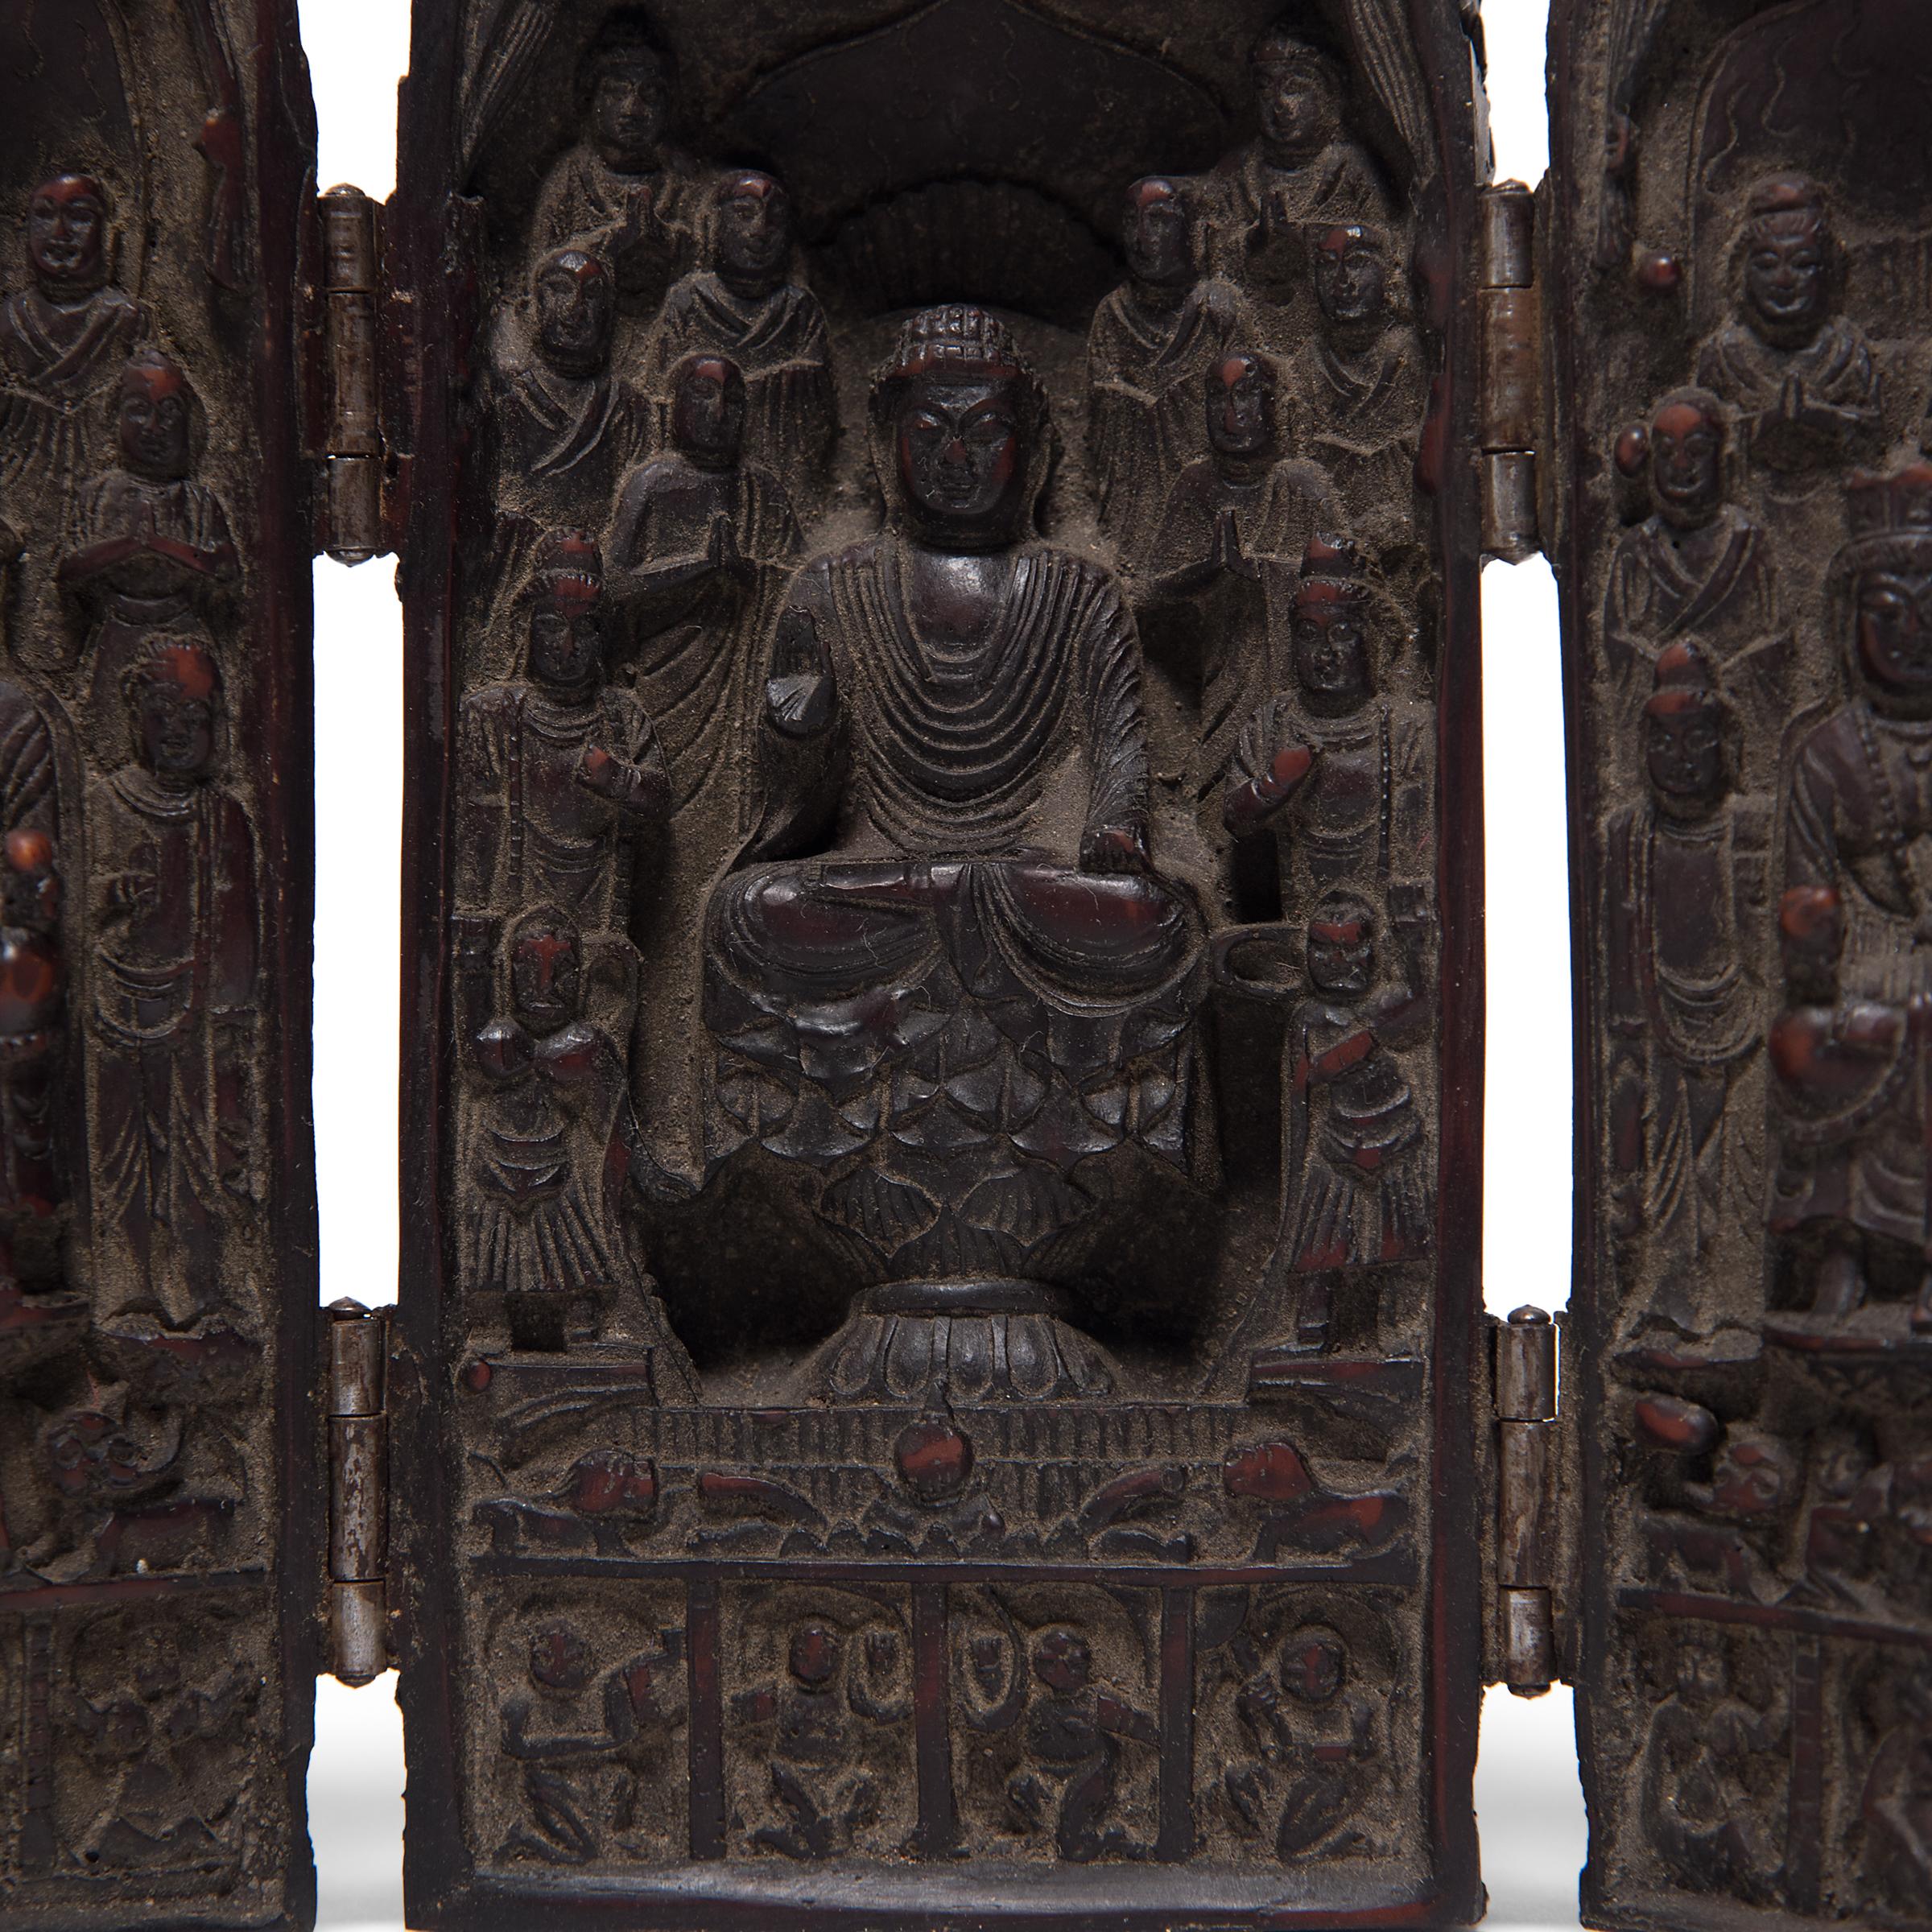 The hinged doors of this petite traveling shrine open to reveal the seated Buddha Shakyamuni surrounded by minor Bodhisattvas and reverent monks. Seated upon a lotus base draped with fabric, the Buddha sits in quiet contemplation with hands in the